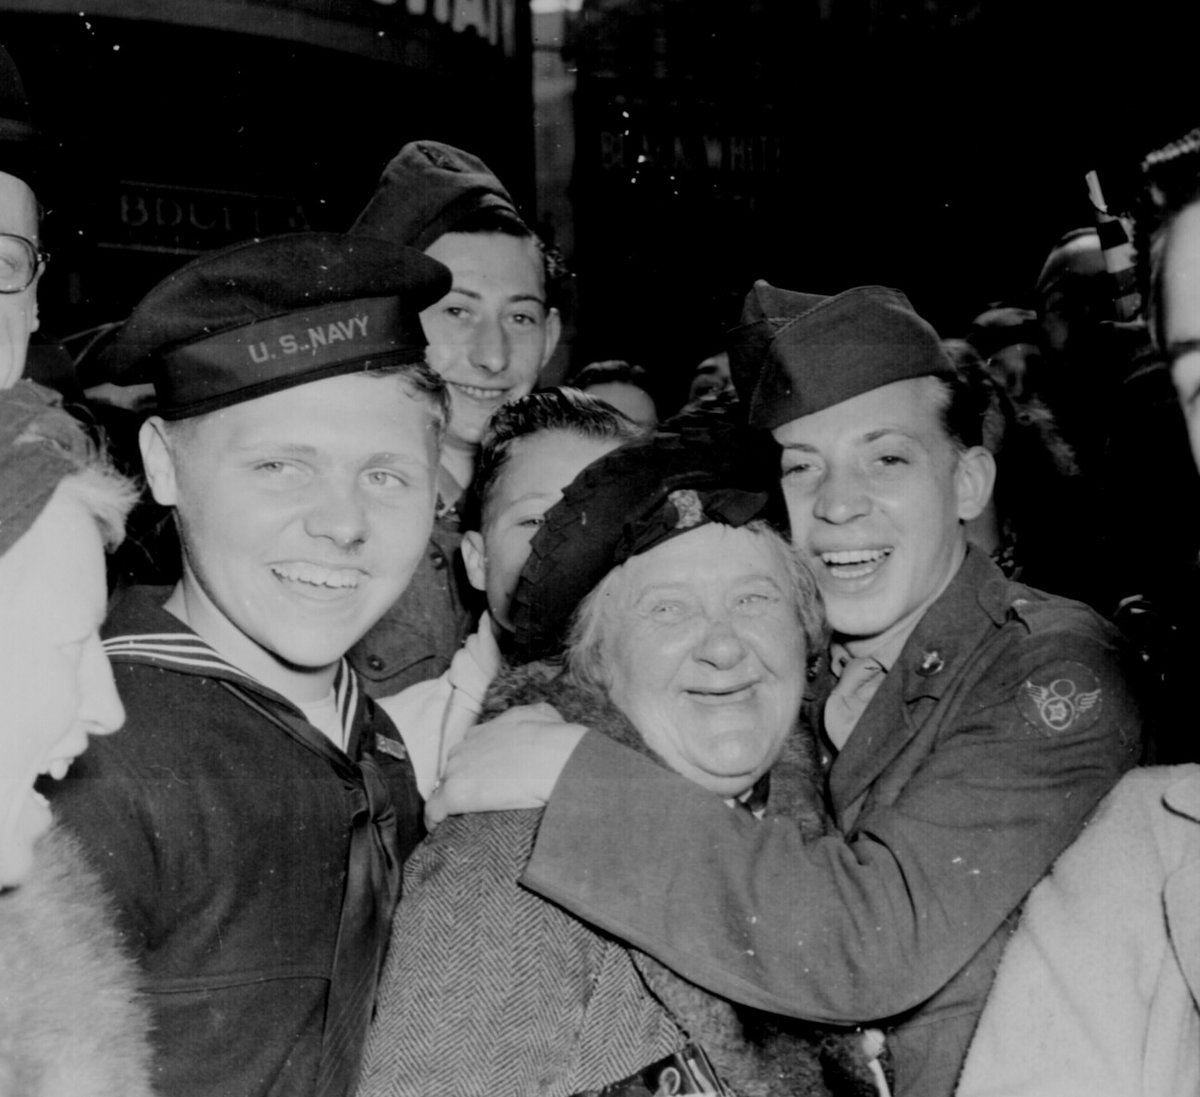 #OTD in 1945, Germany surrendered its military forces in Reims, France. The following day #VEDay celebrations erupt across Allied nations, officially ending #WWII in Europe. See its impact in history: bit.ly/3OQclEO